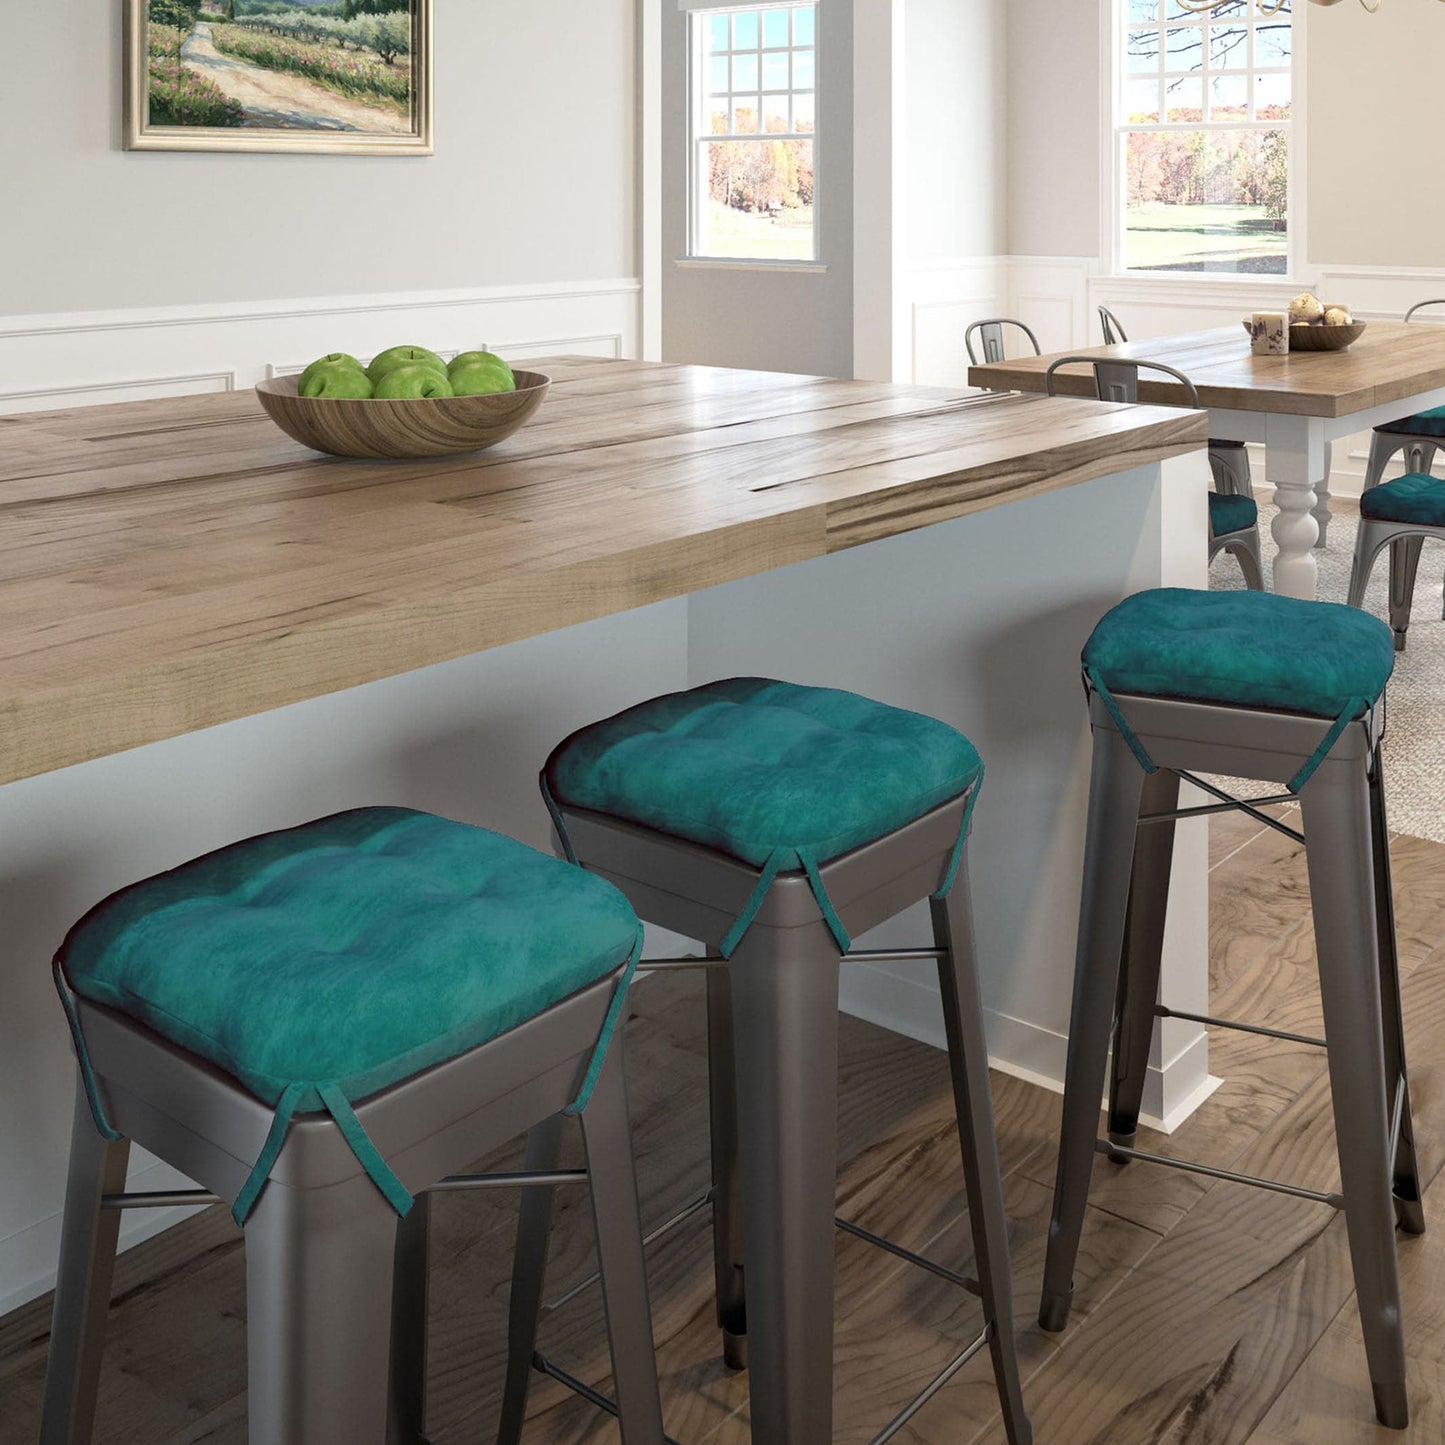 Micro-suede Turquoise Square Industrial Bar Stool Cushion - 12"